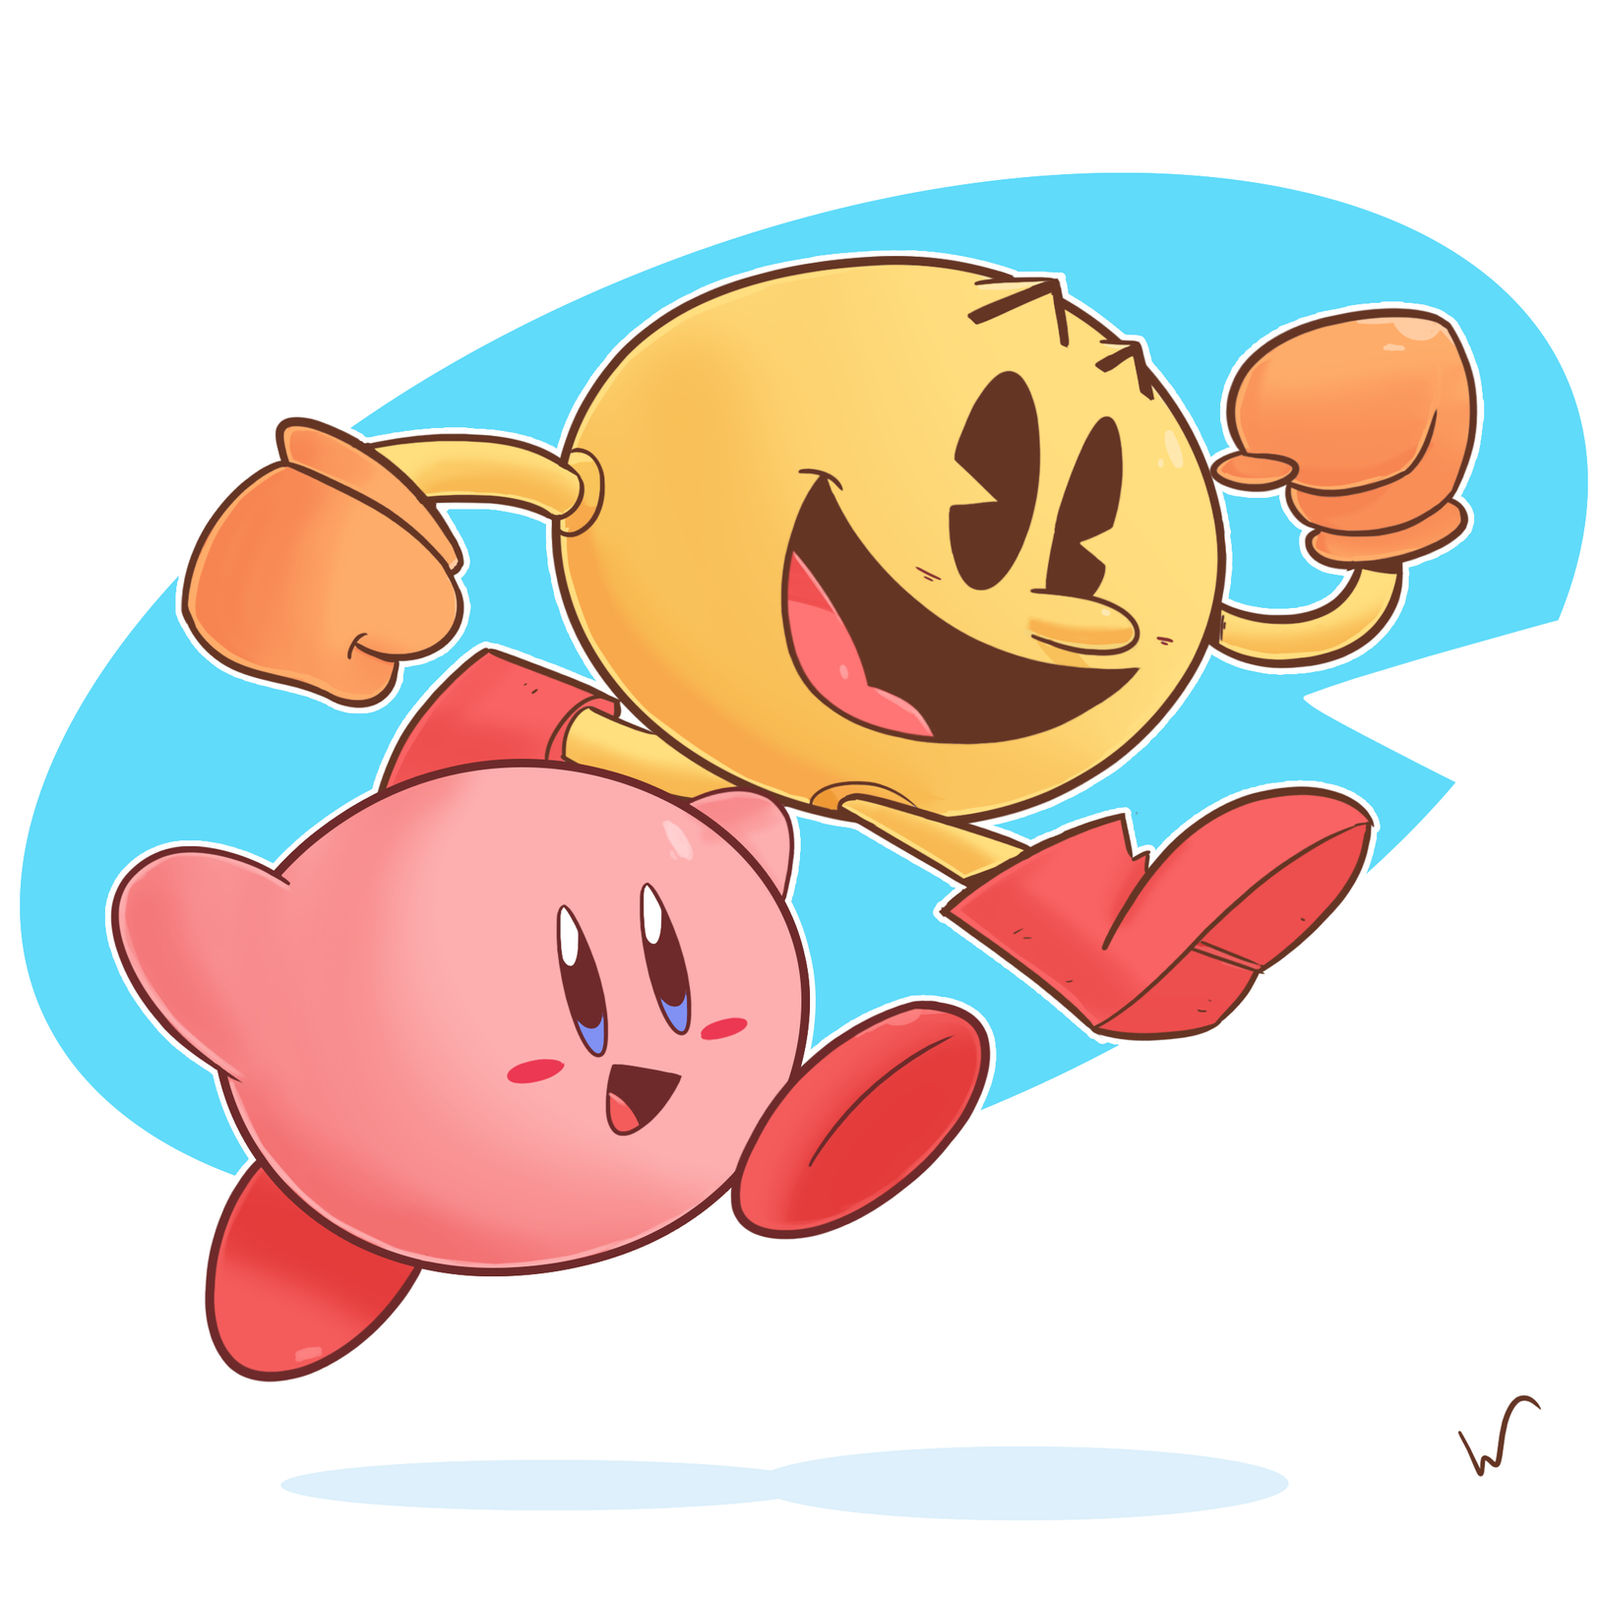 Kirby and Pac-Man